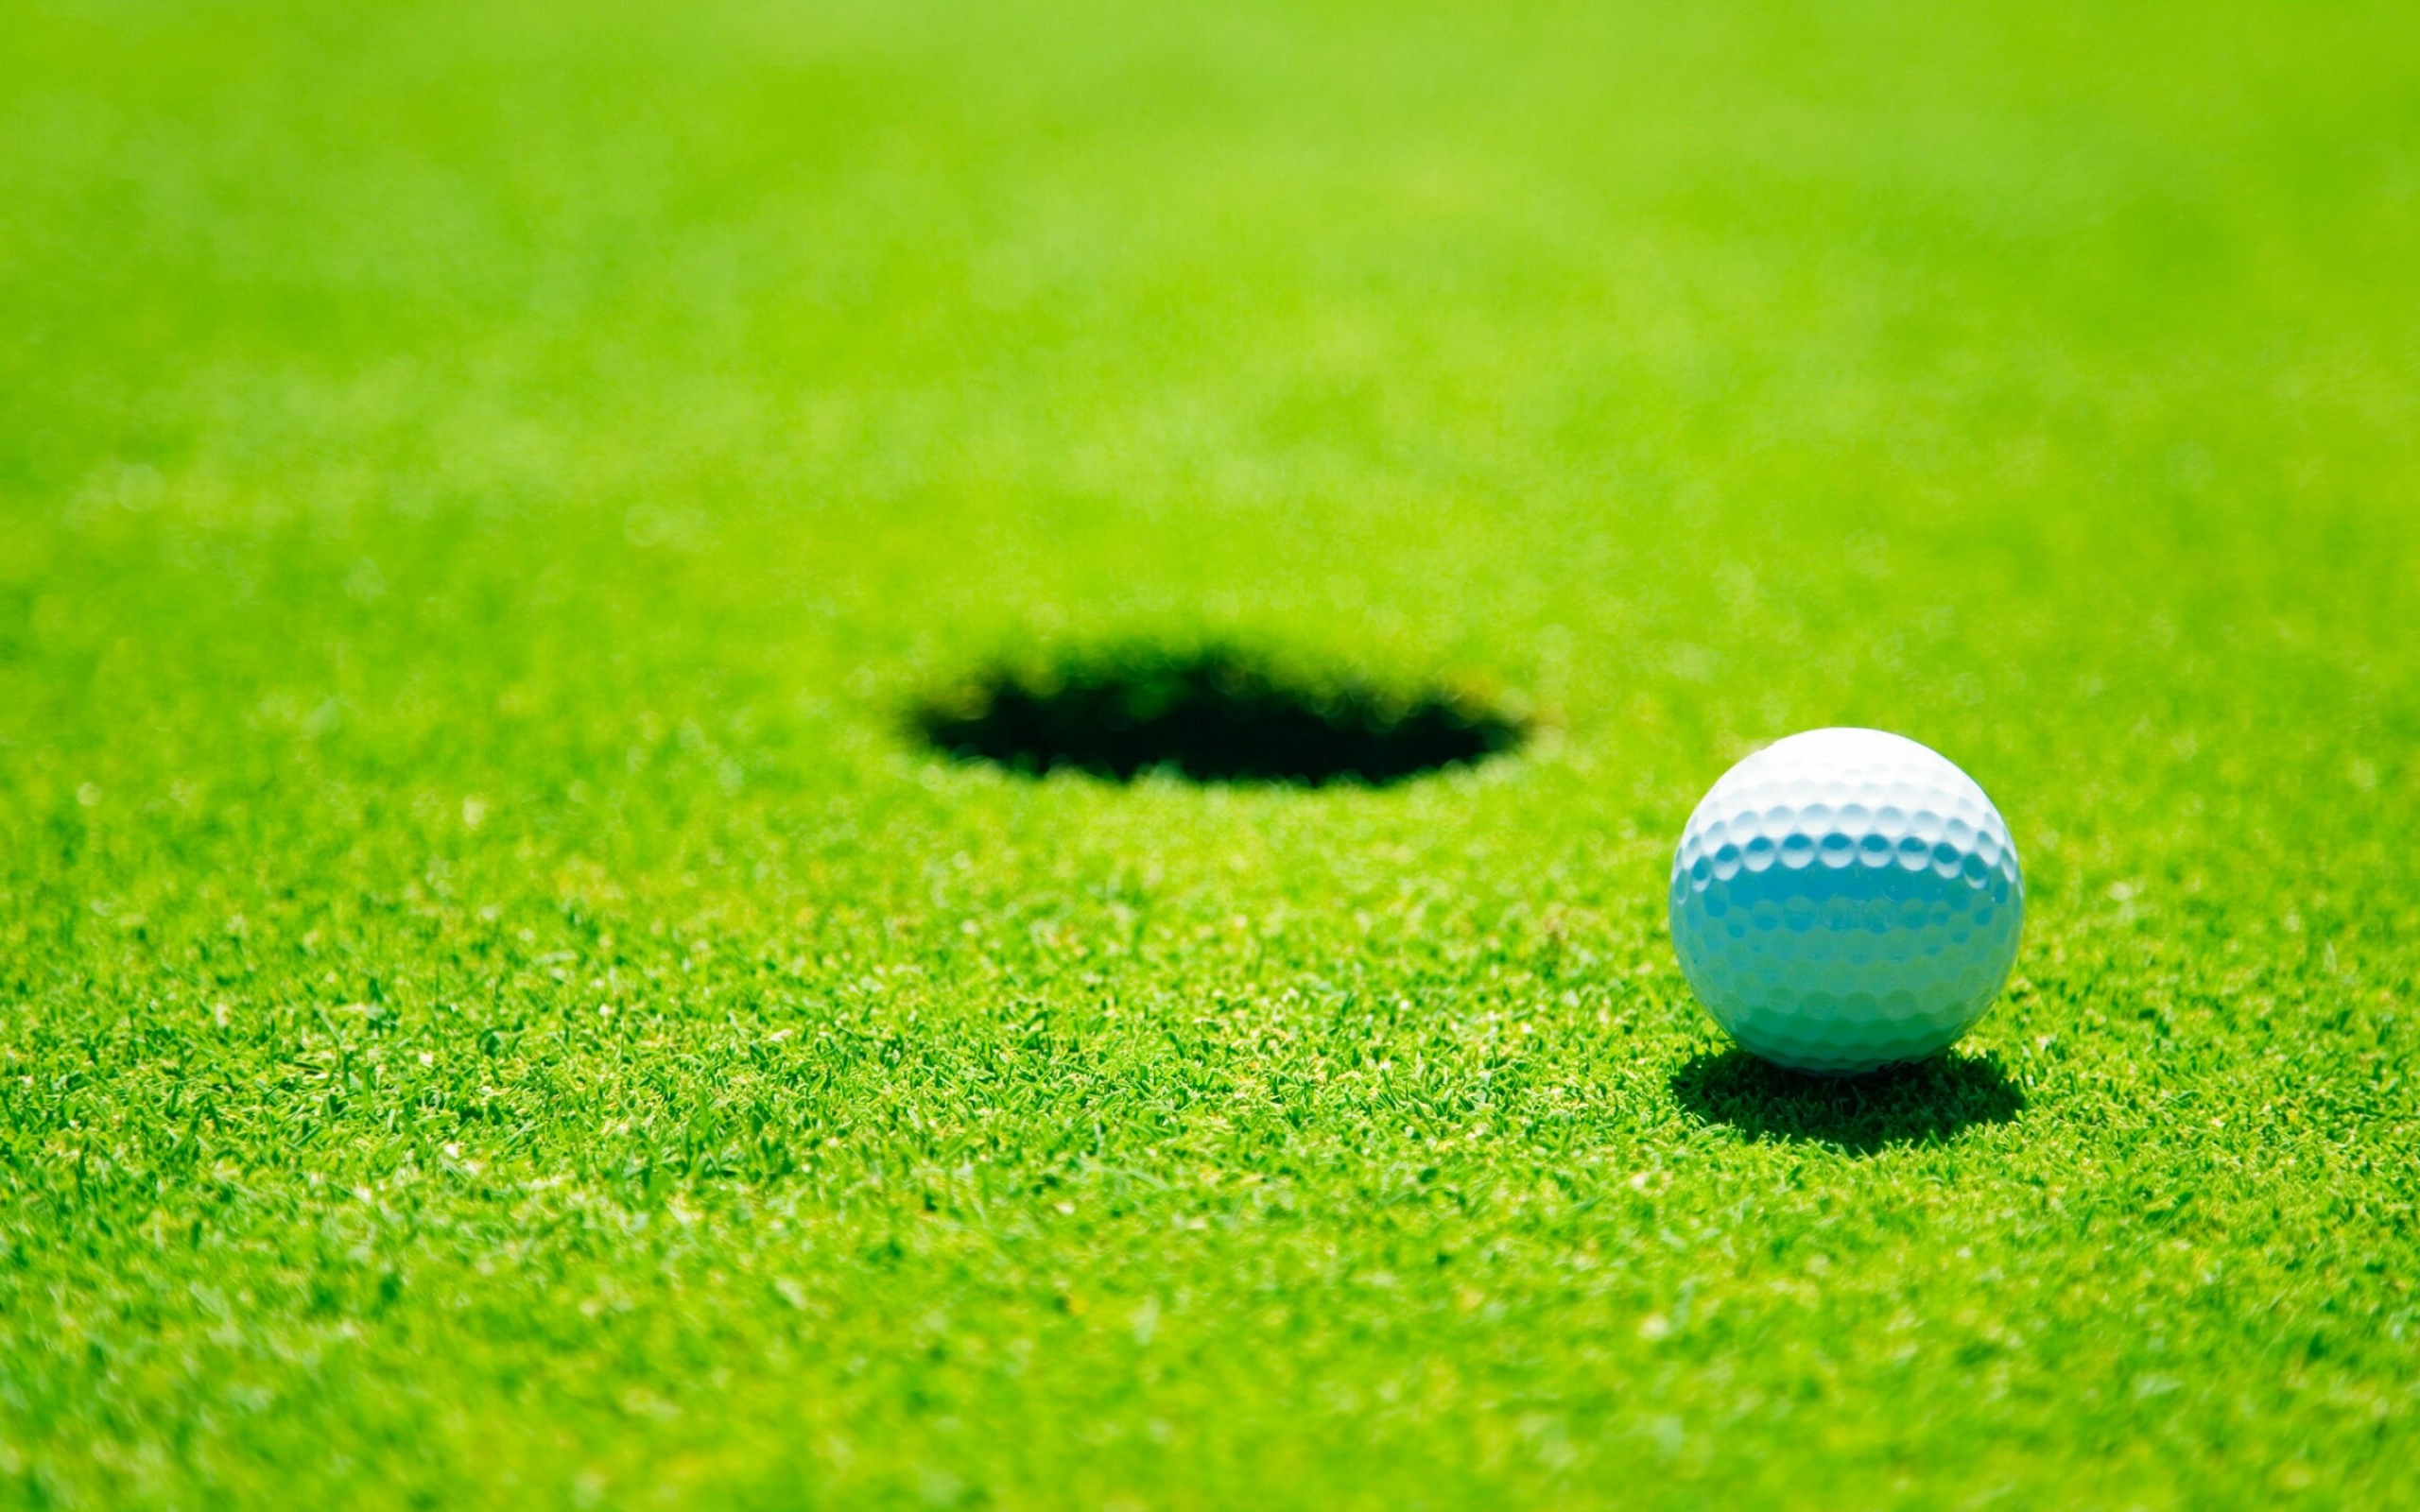 Golf: A precision sport, Played on an outdoor course consisting of 18 holes. 2560x1600 HD Wallpaper.